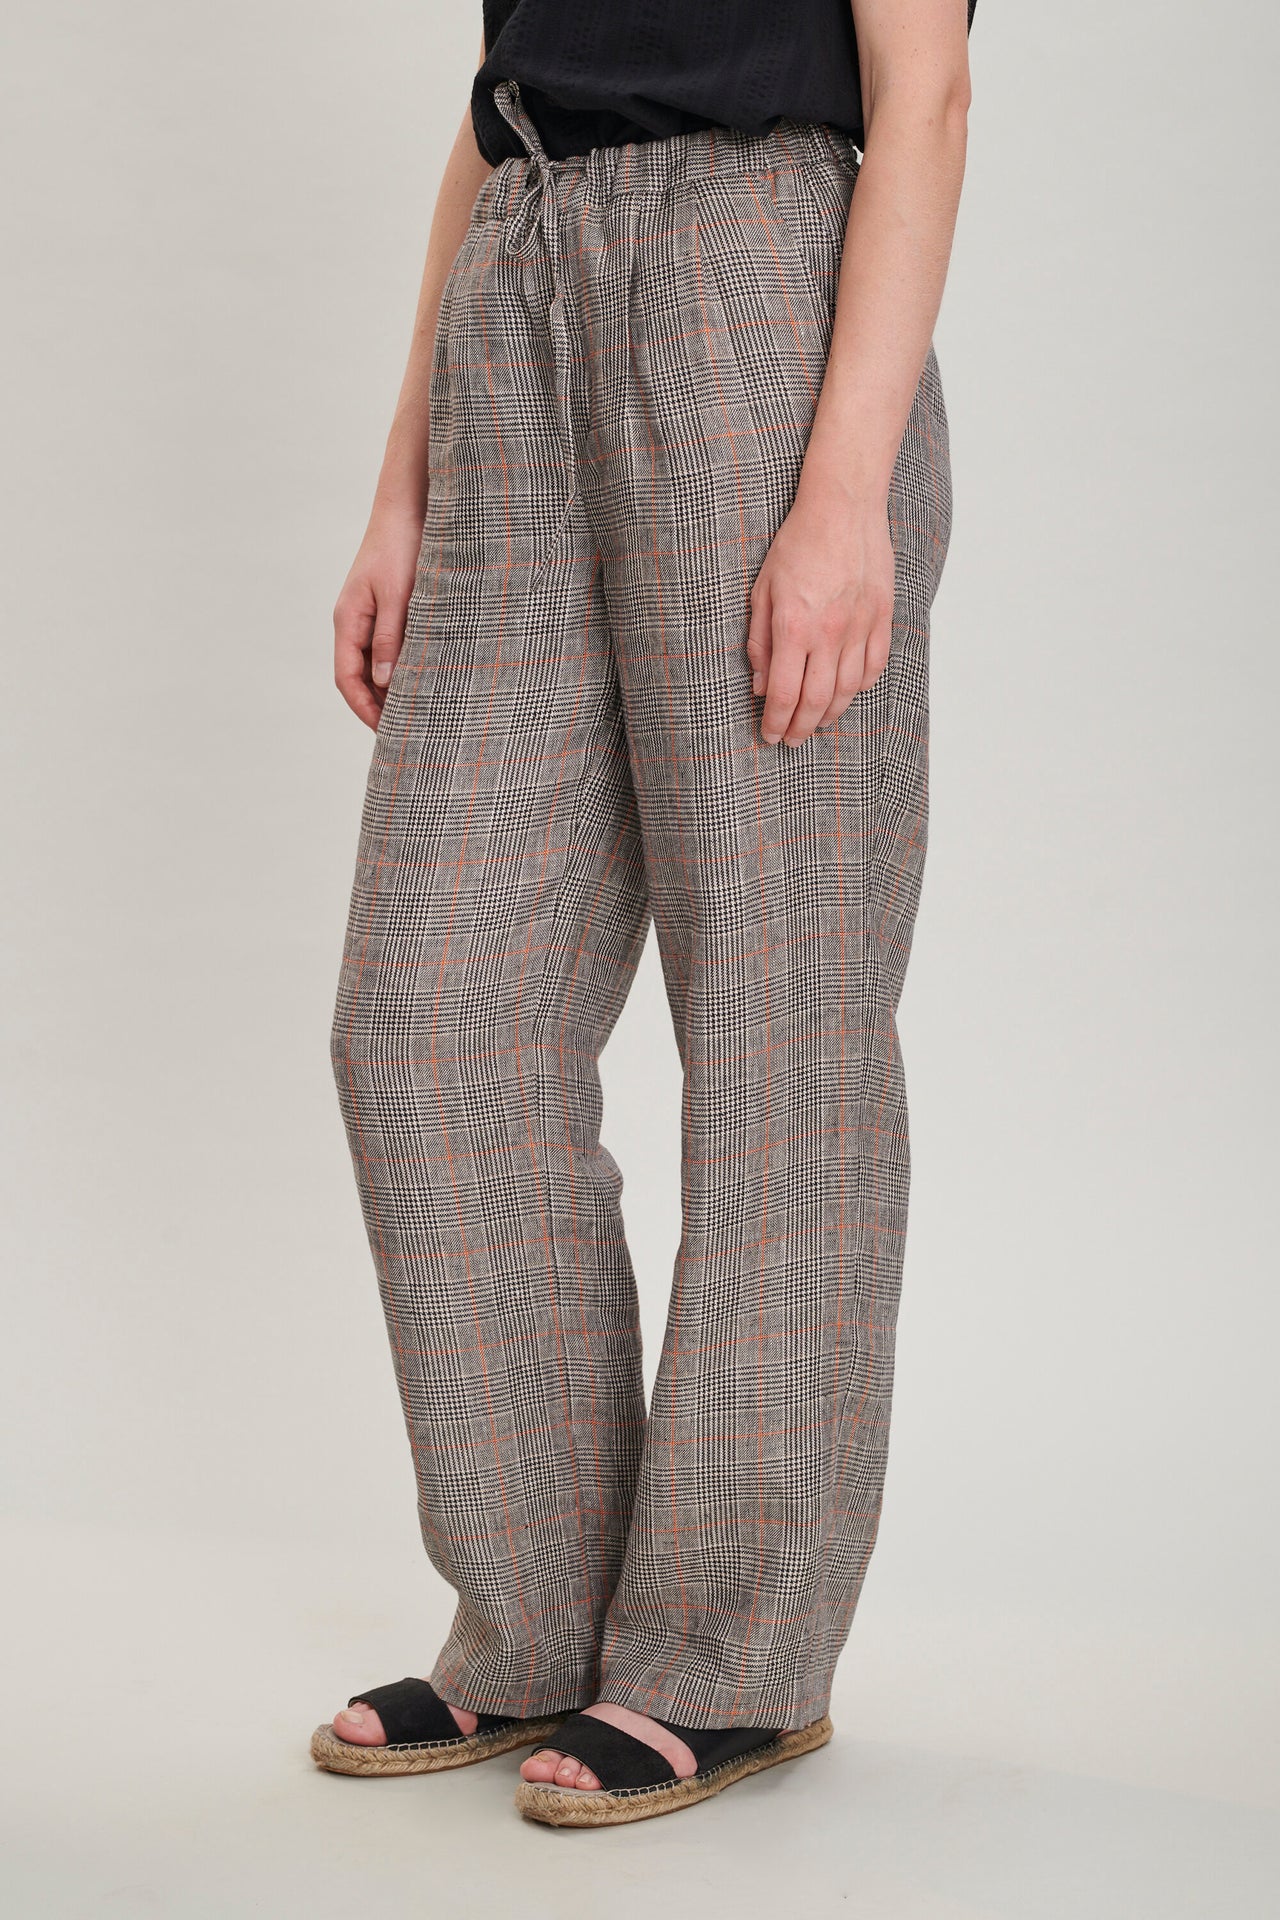 Women's Trousers in a Grey and Vibrant Orange Prince of Wales Italian Linen